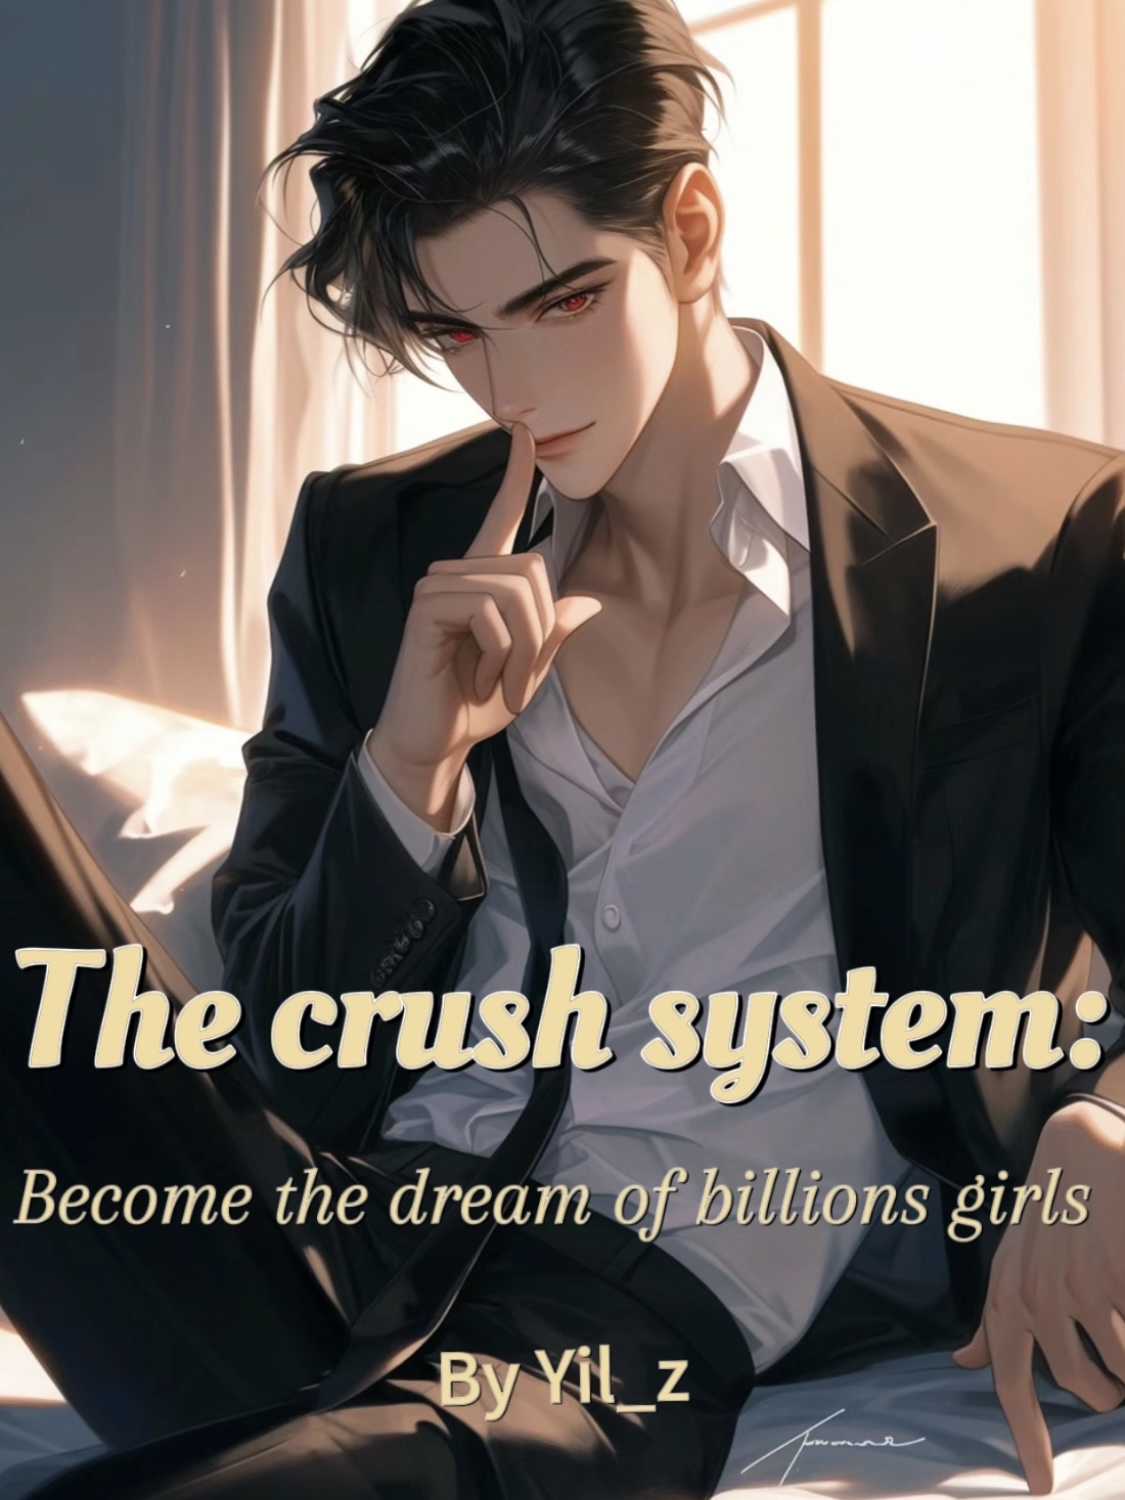 The crush system:Become the dream of billions girls